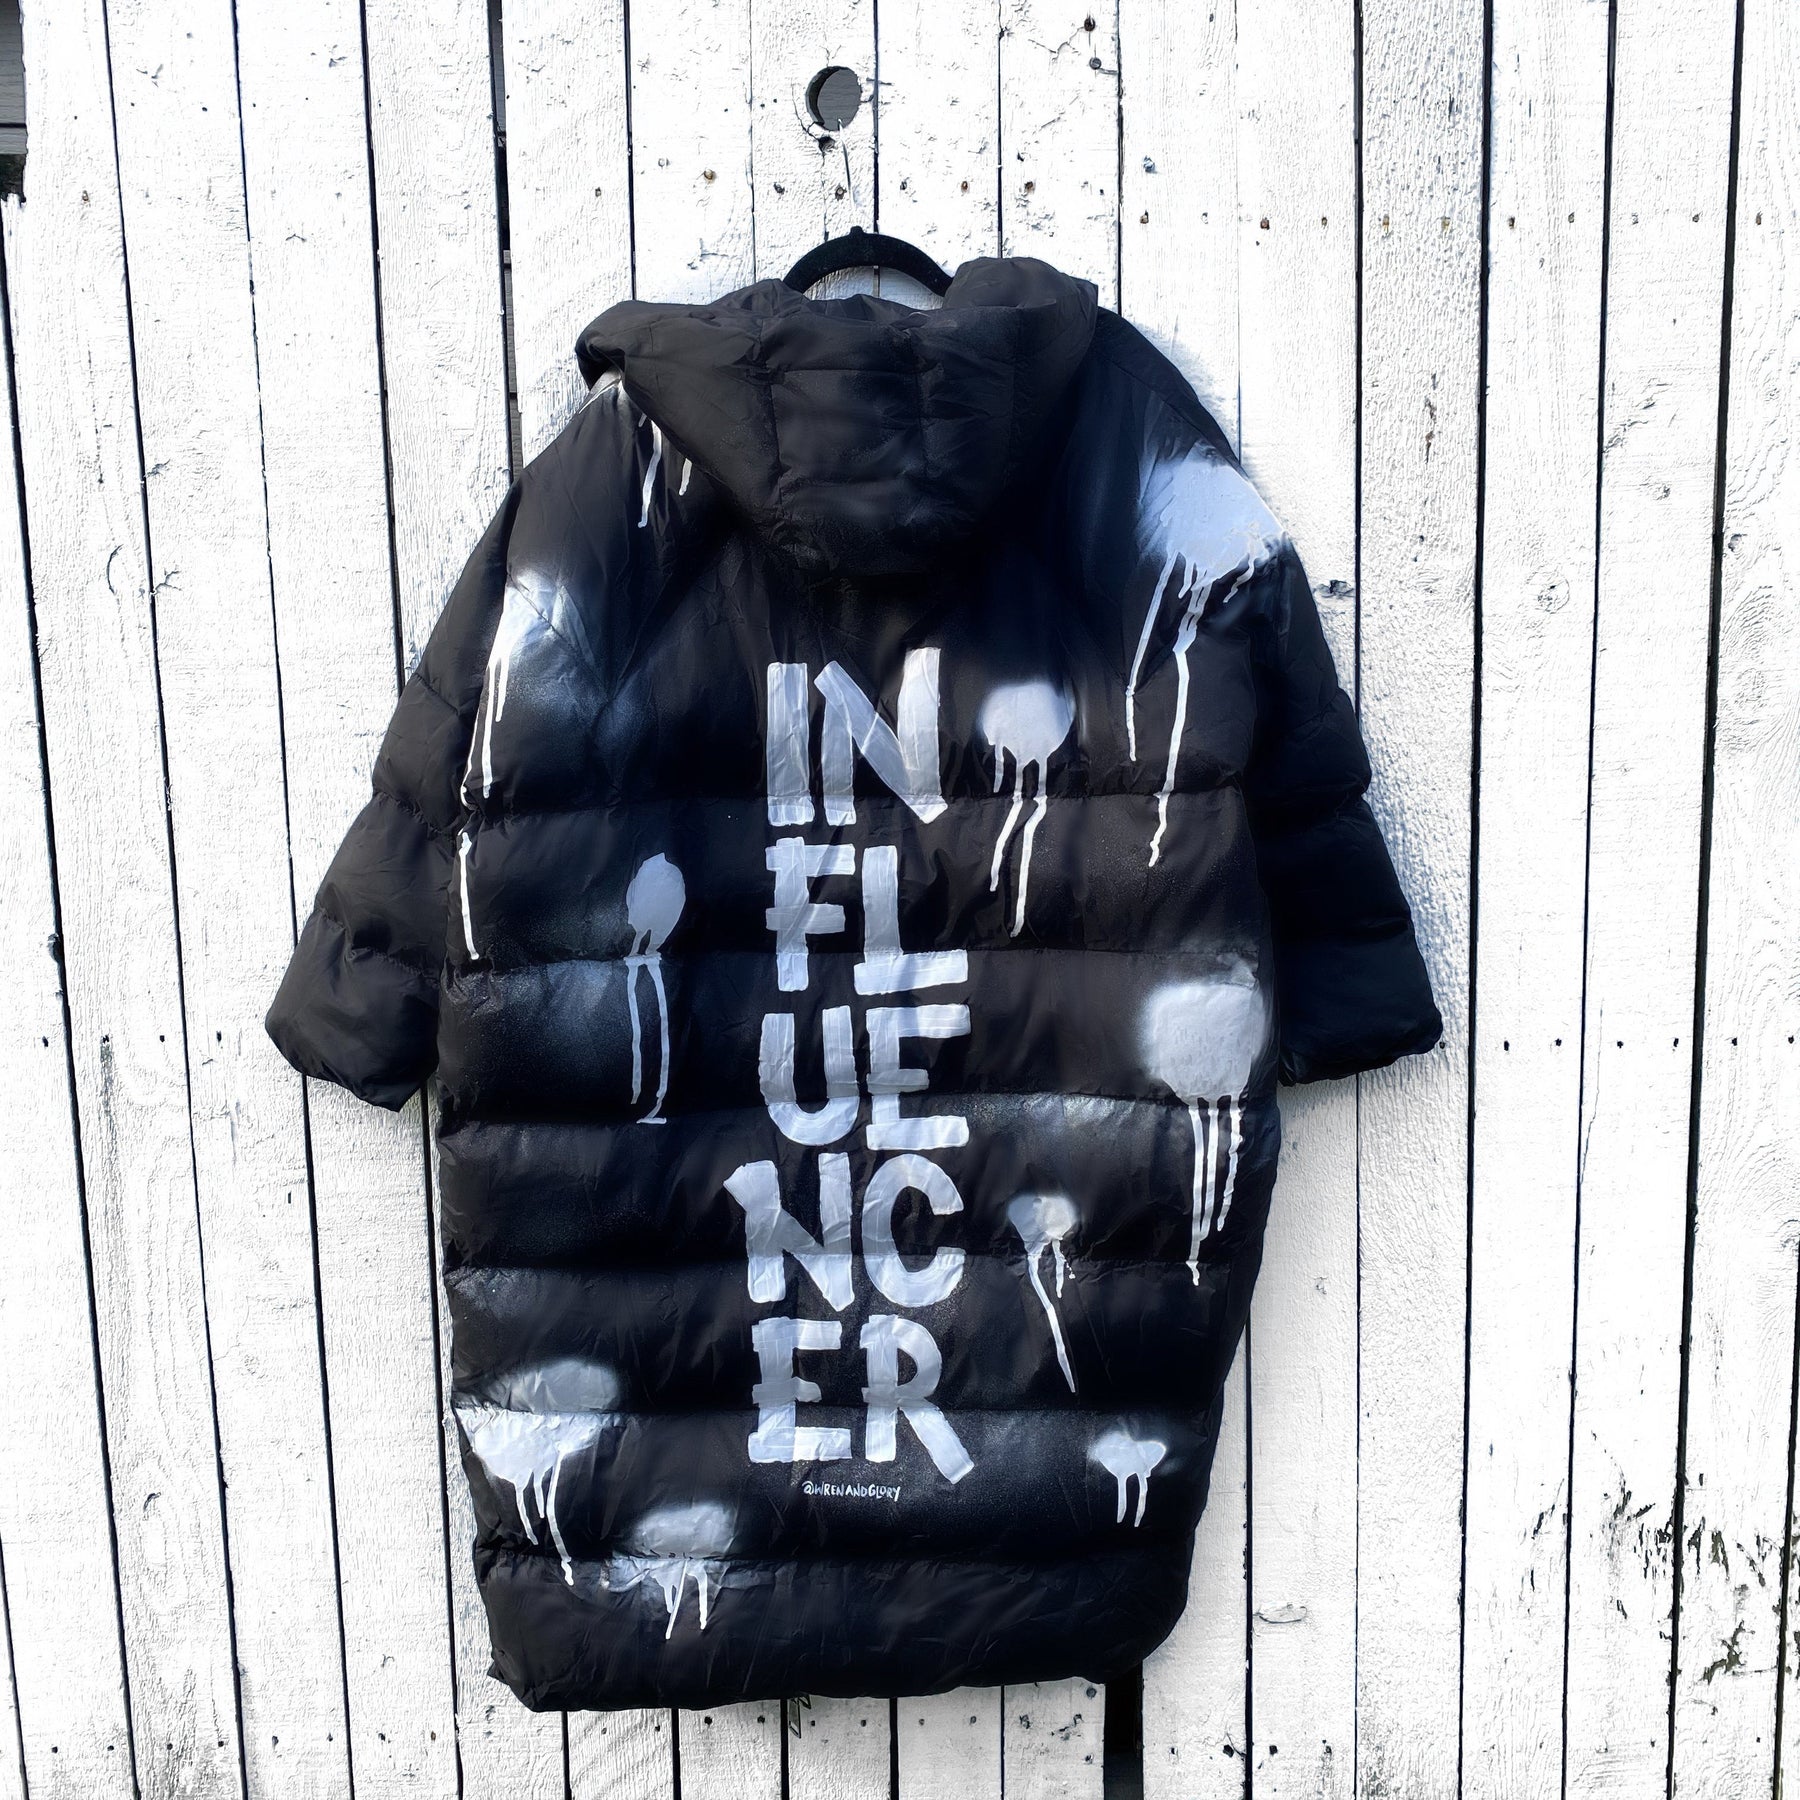 The COOLEST, MOST COMFORTABLE puffer jacket. White spray paint surrounding entire jacket, with INFLUENCER painted down the back, center, in large text. Signed @wrenandglory.